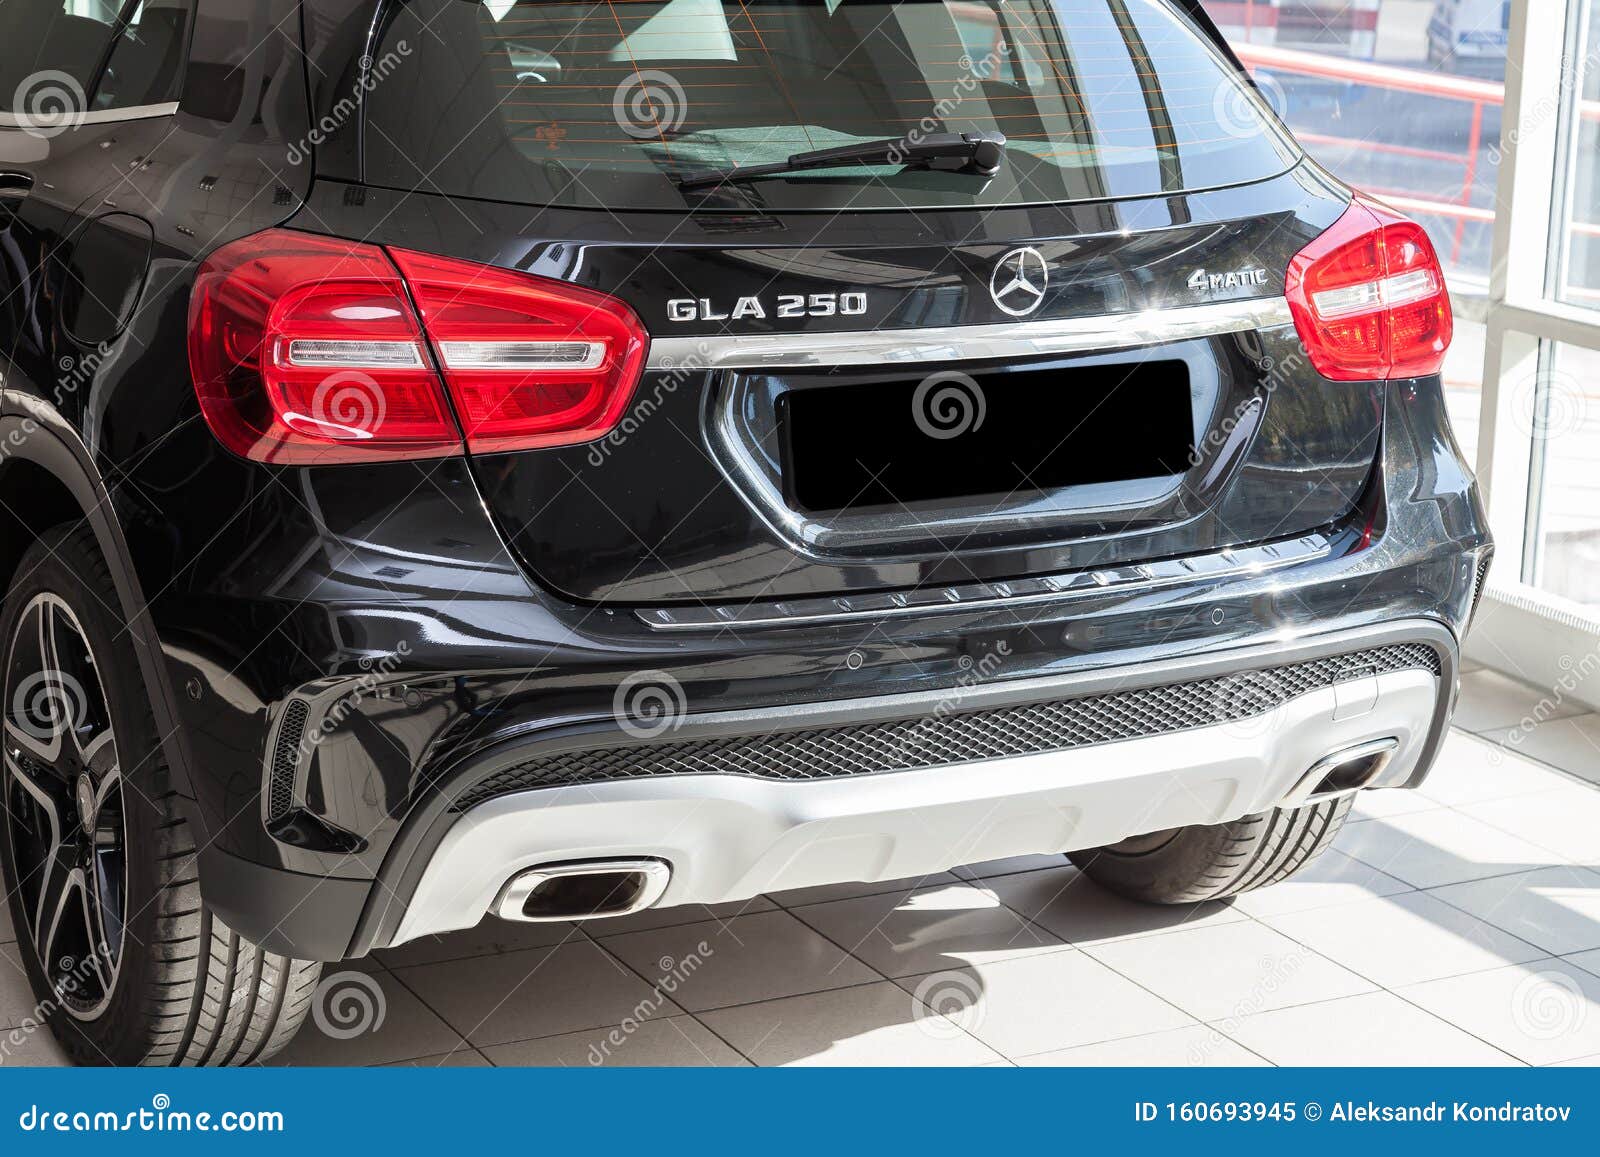 Black Mercedes Benz Gla Class 16 Year Rear Bumper View With Dark Gray Interior In Excellent Condition In A Dealership With White Editorial Image Image Of Sportback Motor